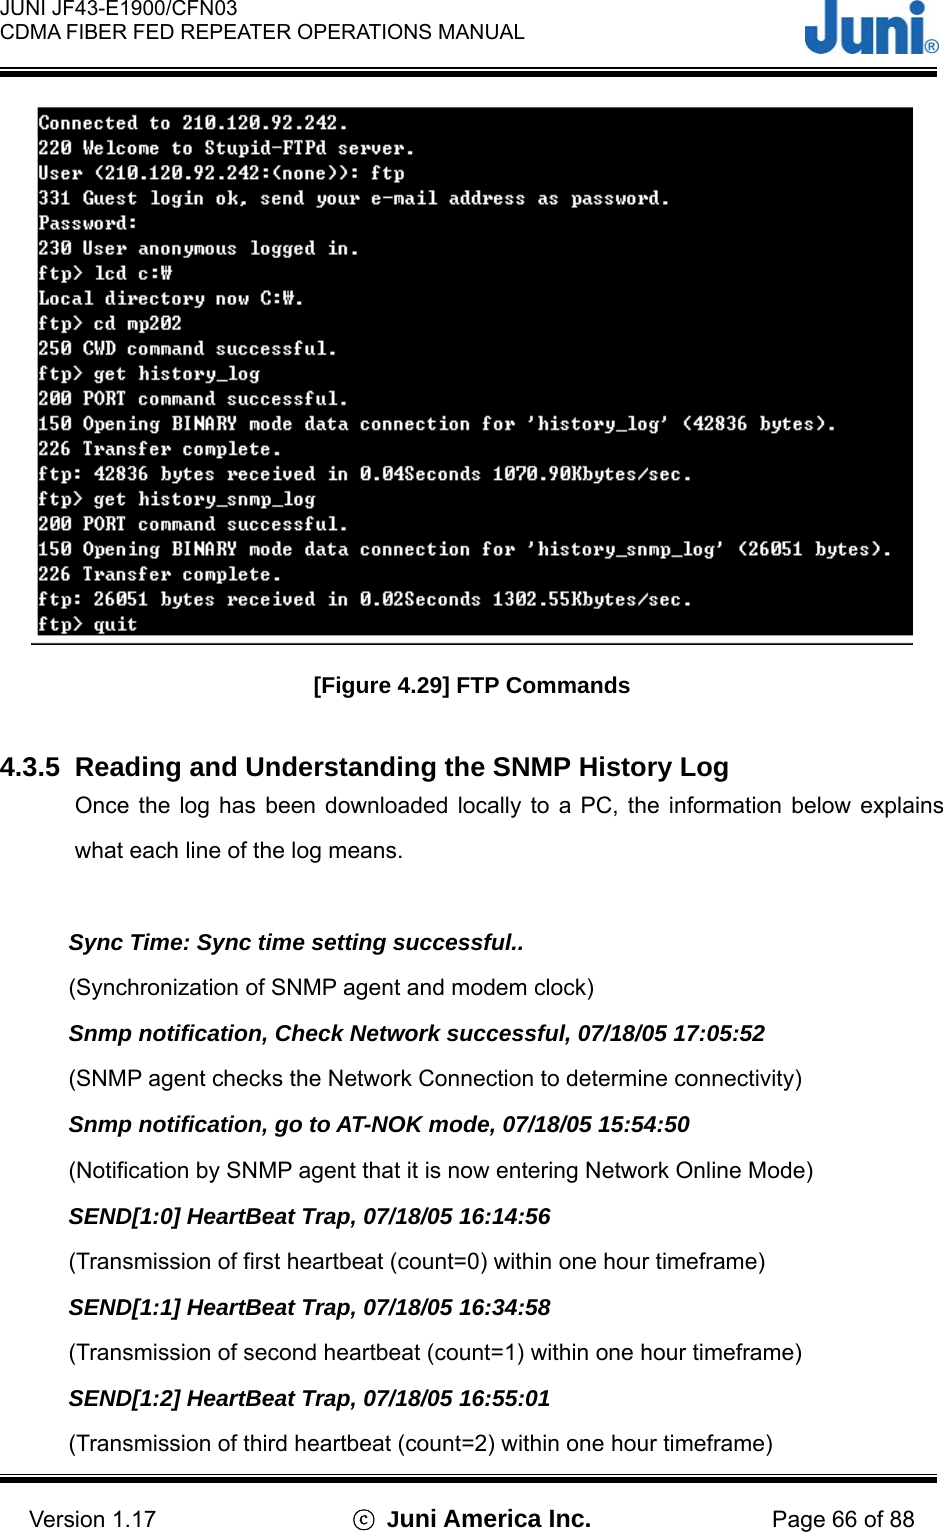  JUNI JF43-E1900/CFN03 CDMA FIBER FED REPEATER OPERATIONS MANUAL                                    Version 1.17  ⓒ Juni America Inc. Page 66 of 88  [Figure 4.29] FTP Commands  4.3.5  Reading and Understanding the SNMP History Log Once the log has been downloaded locally to a PC, the information below explains what each line of the log means.  Sync Time: Sync time setting successful.. (Synchronization of SNMP agent and modem clock) Snmp notification, Check Network successful, 07/18/05 17:05:52 (SNMP agent checks the Network Connection to determine connectivity) Snmp notification, go to AT-NOK mode, 07/18/05 15:54:50 (Notification by SNMP agent that it is now entering Network Online Mode) SEND[1:0] HeartBeat Trap, 07/18/05 16:14:56 (Transmission of first heartbeat (count=0) within one hour timeframe) SEND[1:1] HeartBeat Trap, 07/18/05 16:34:58 (Transmission of second heartbeat (count=1) within one hour timeframe) SEND[1:2] HeartBeat Trap, 07/18/05 16:55:01 (Transmission of third heartbeat (count=2) within one hour timeframe) 